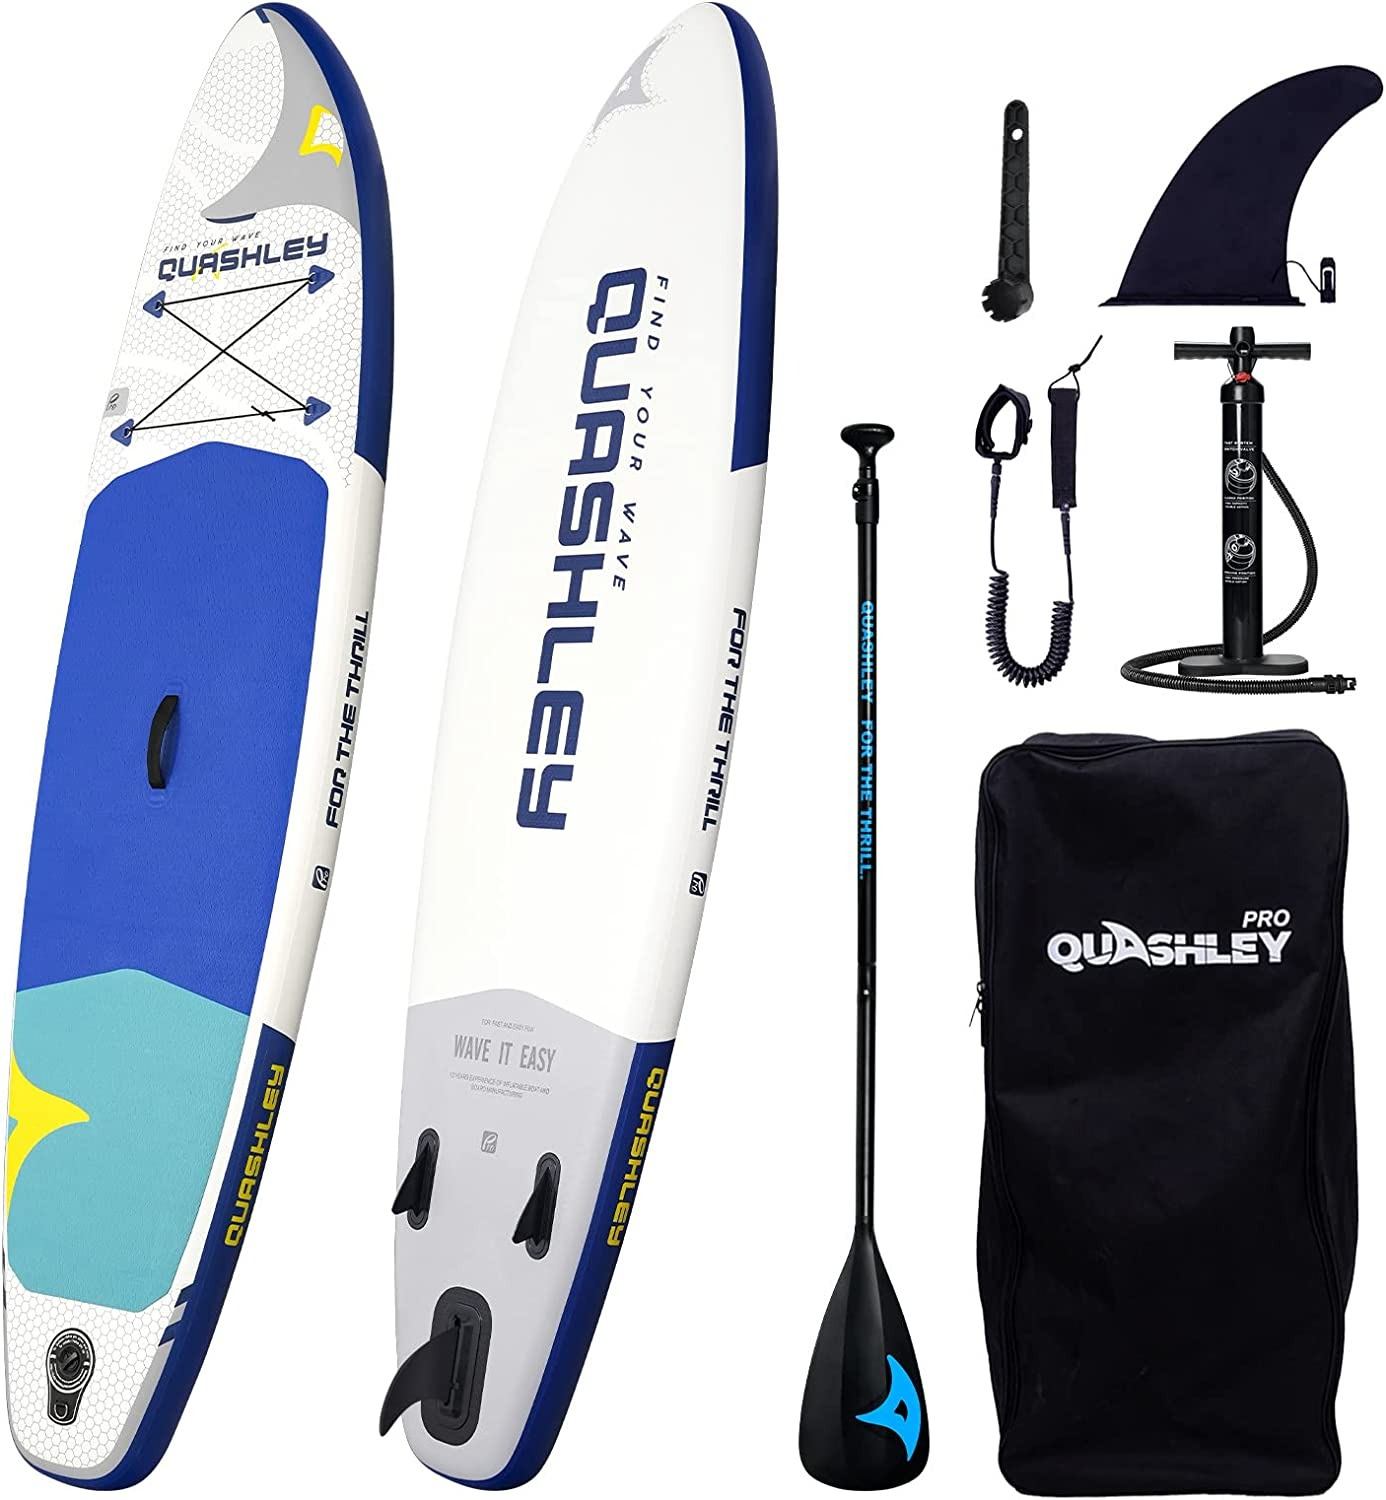 SUP Stand Up Paddle Board 10'6''×32''×6'' Inflatable Paddleboard for Adult  on Water with Family and Friend